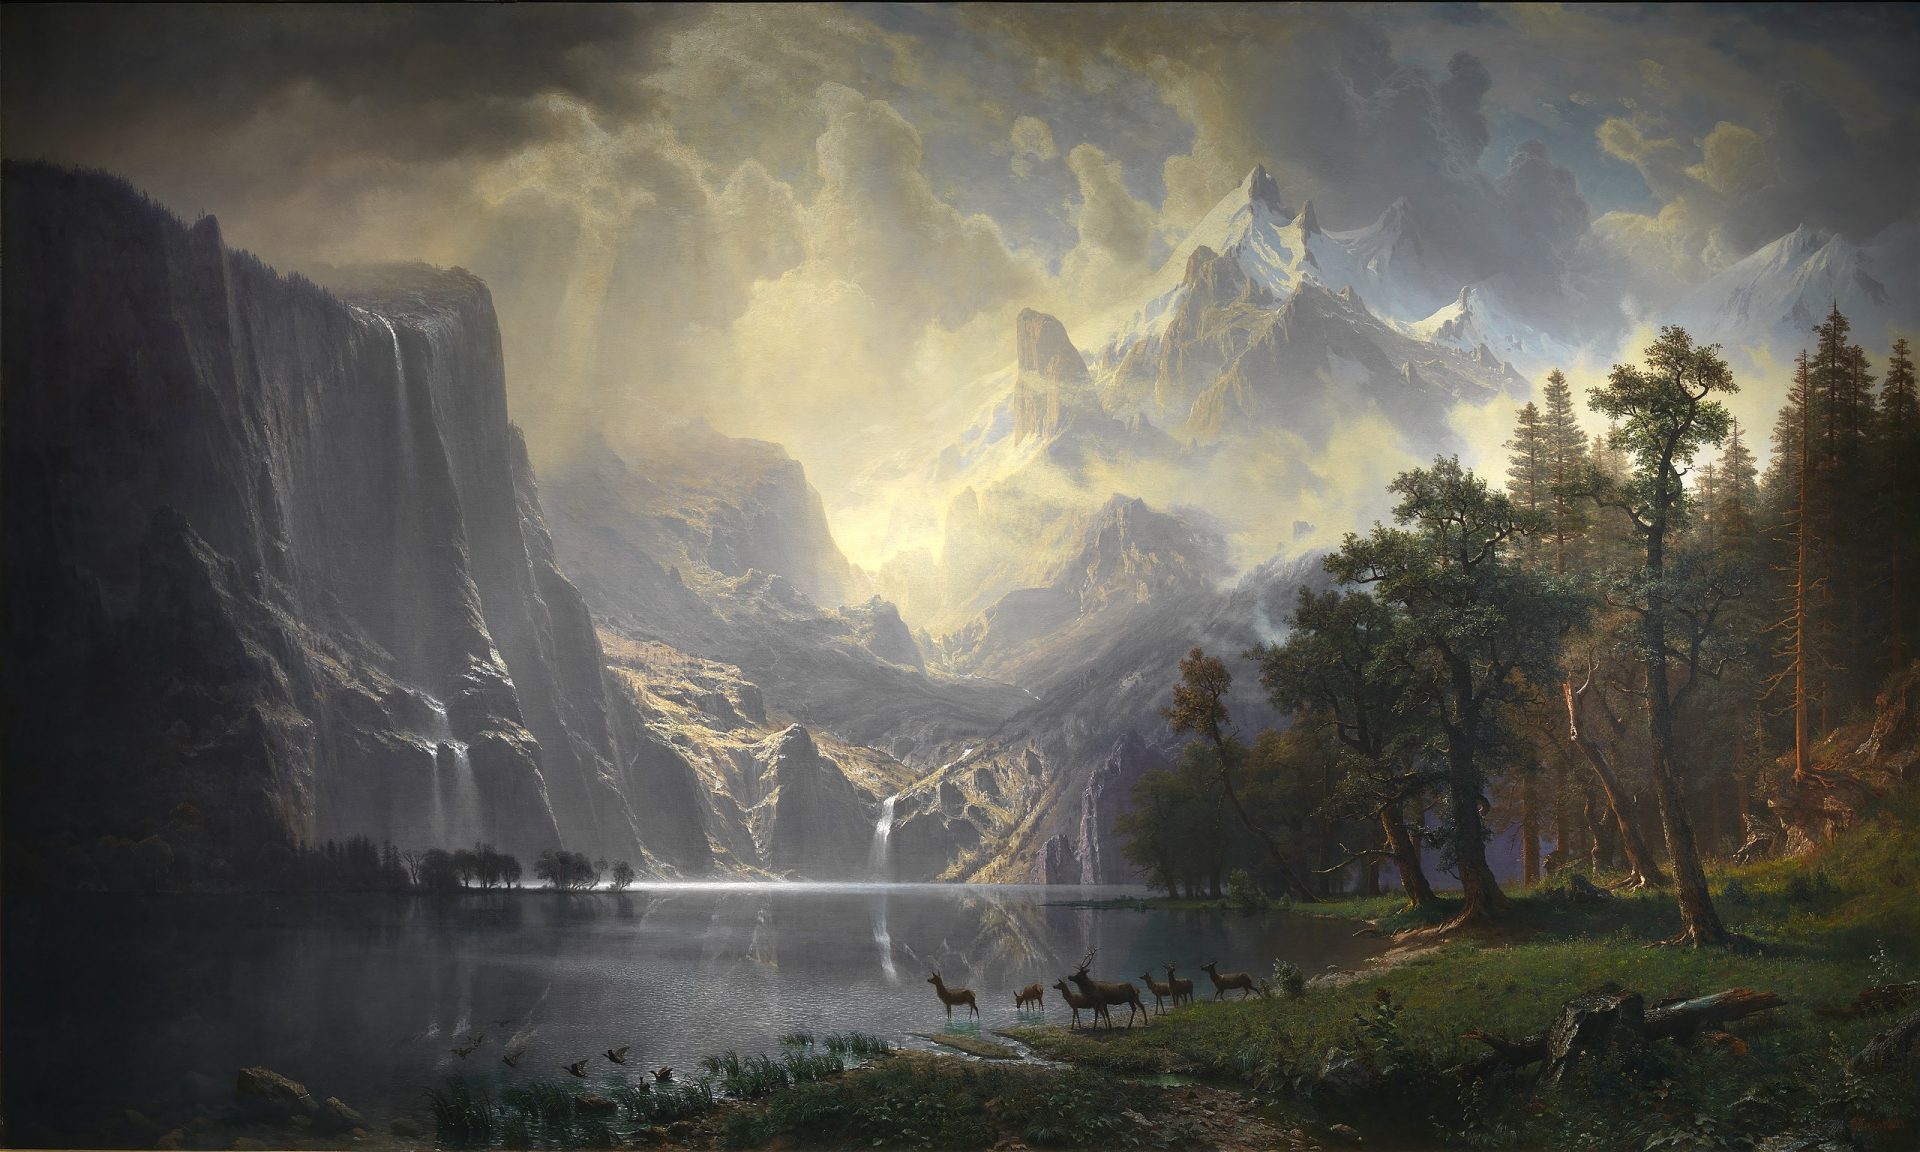 Painting featuring rugged mountains under a bright sky with sun rays piercing the clouds, a serene lake with deer and waterfowl by the edge, and a forest on the right. There's a barely visible single trout in the shadowy water on the left.